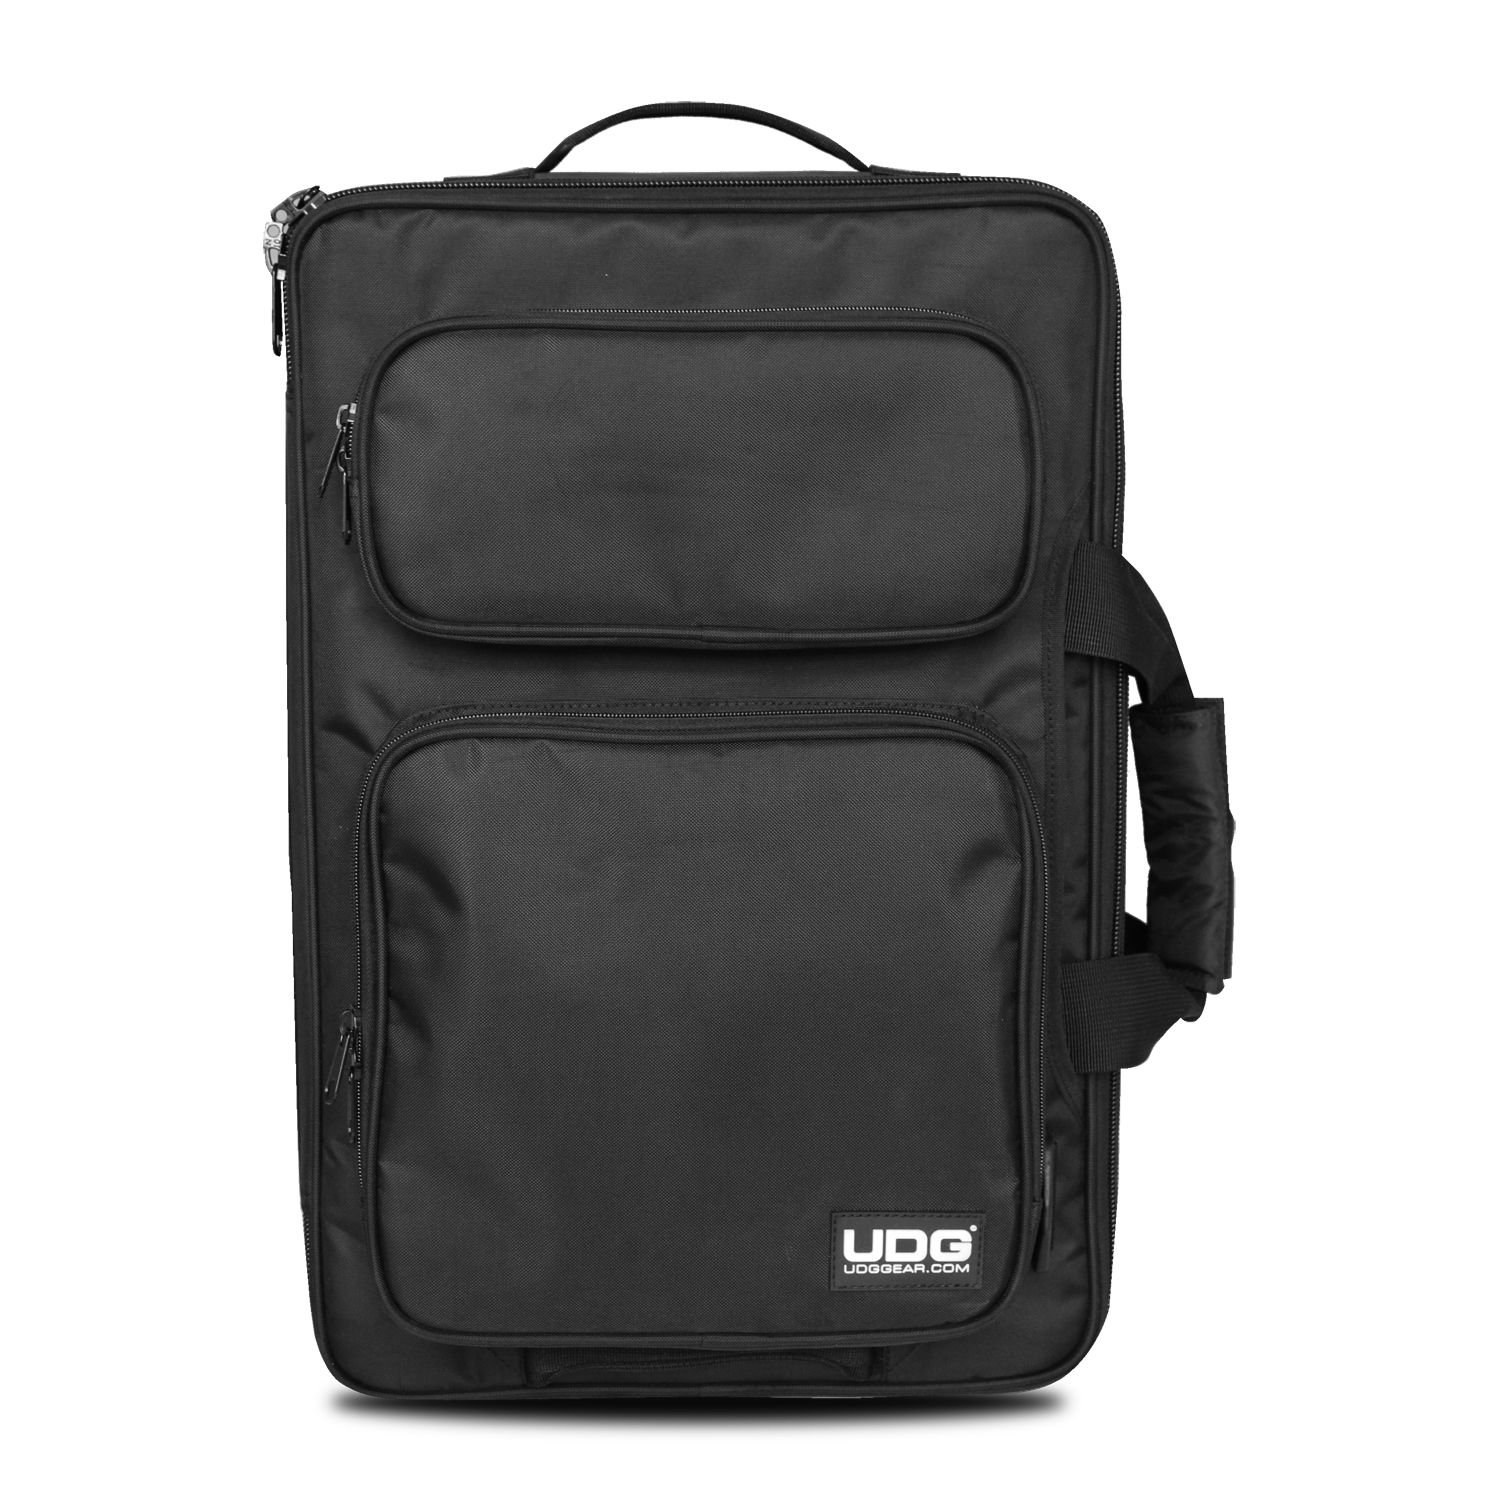 u9103blor ni s4 midi controller backpack front pic